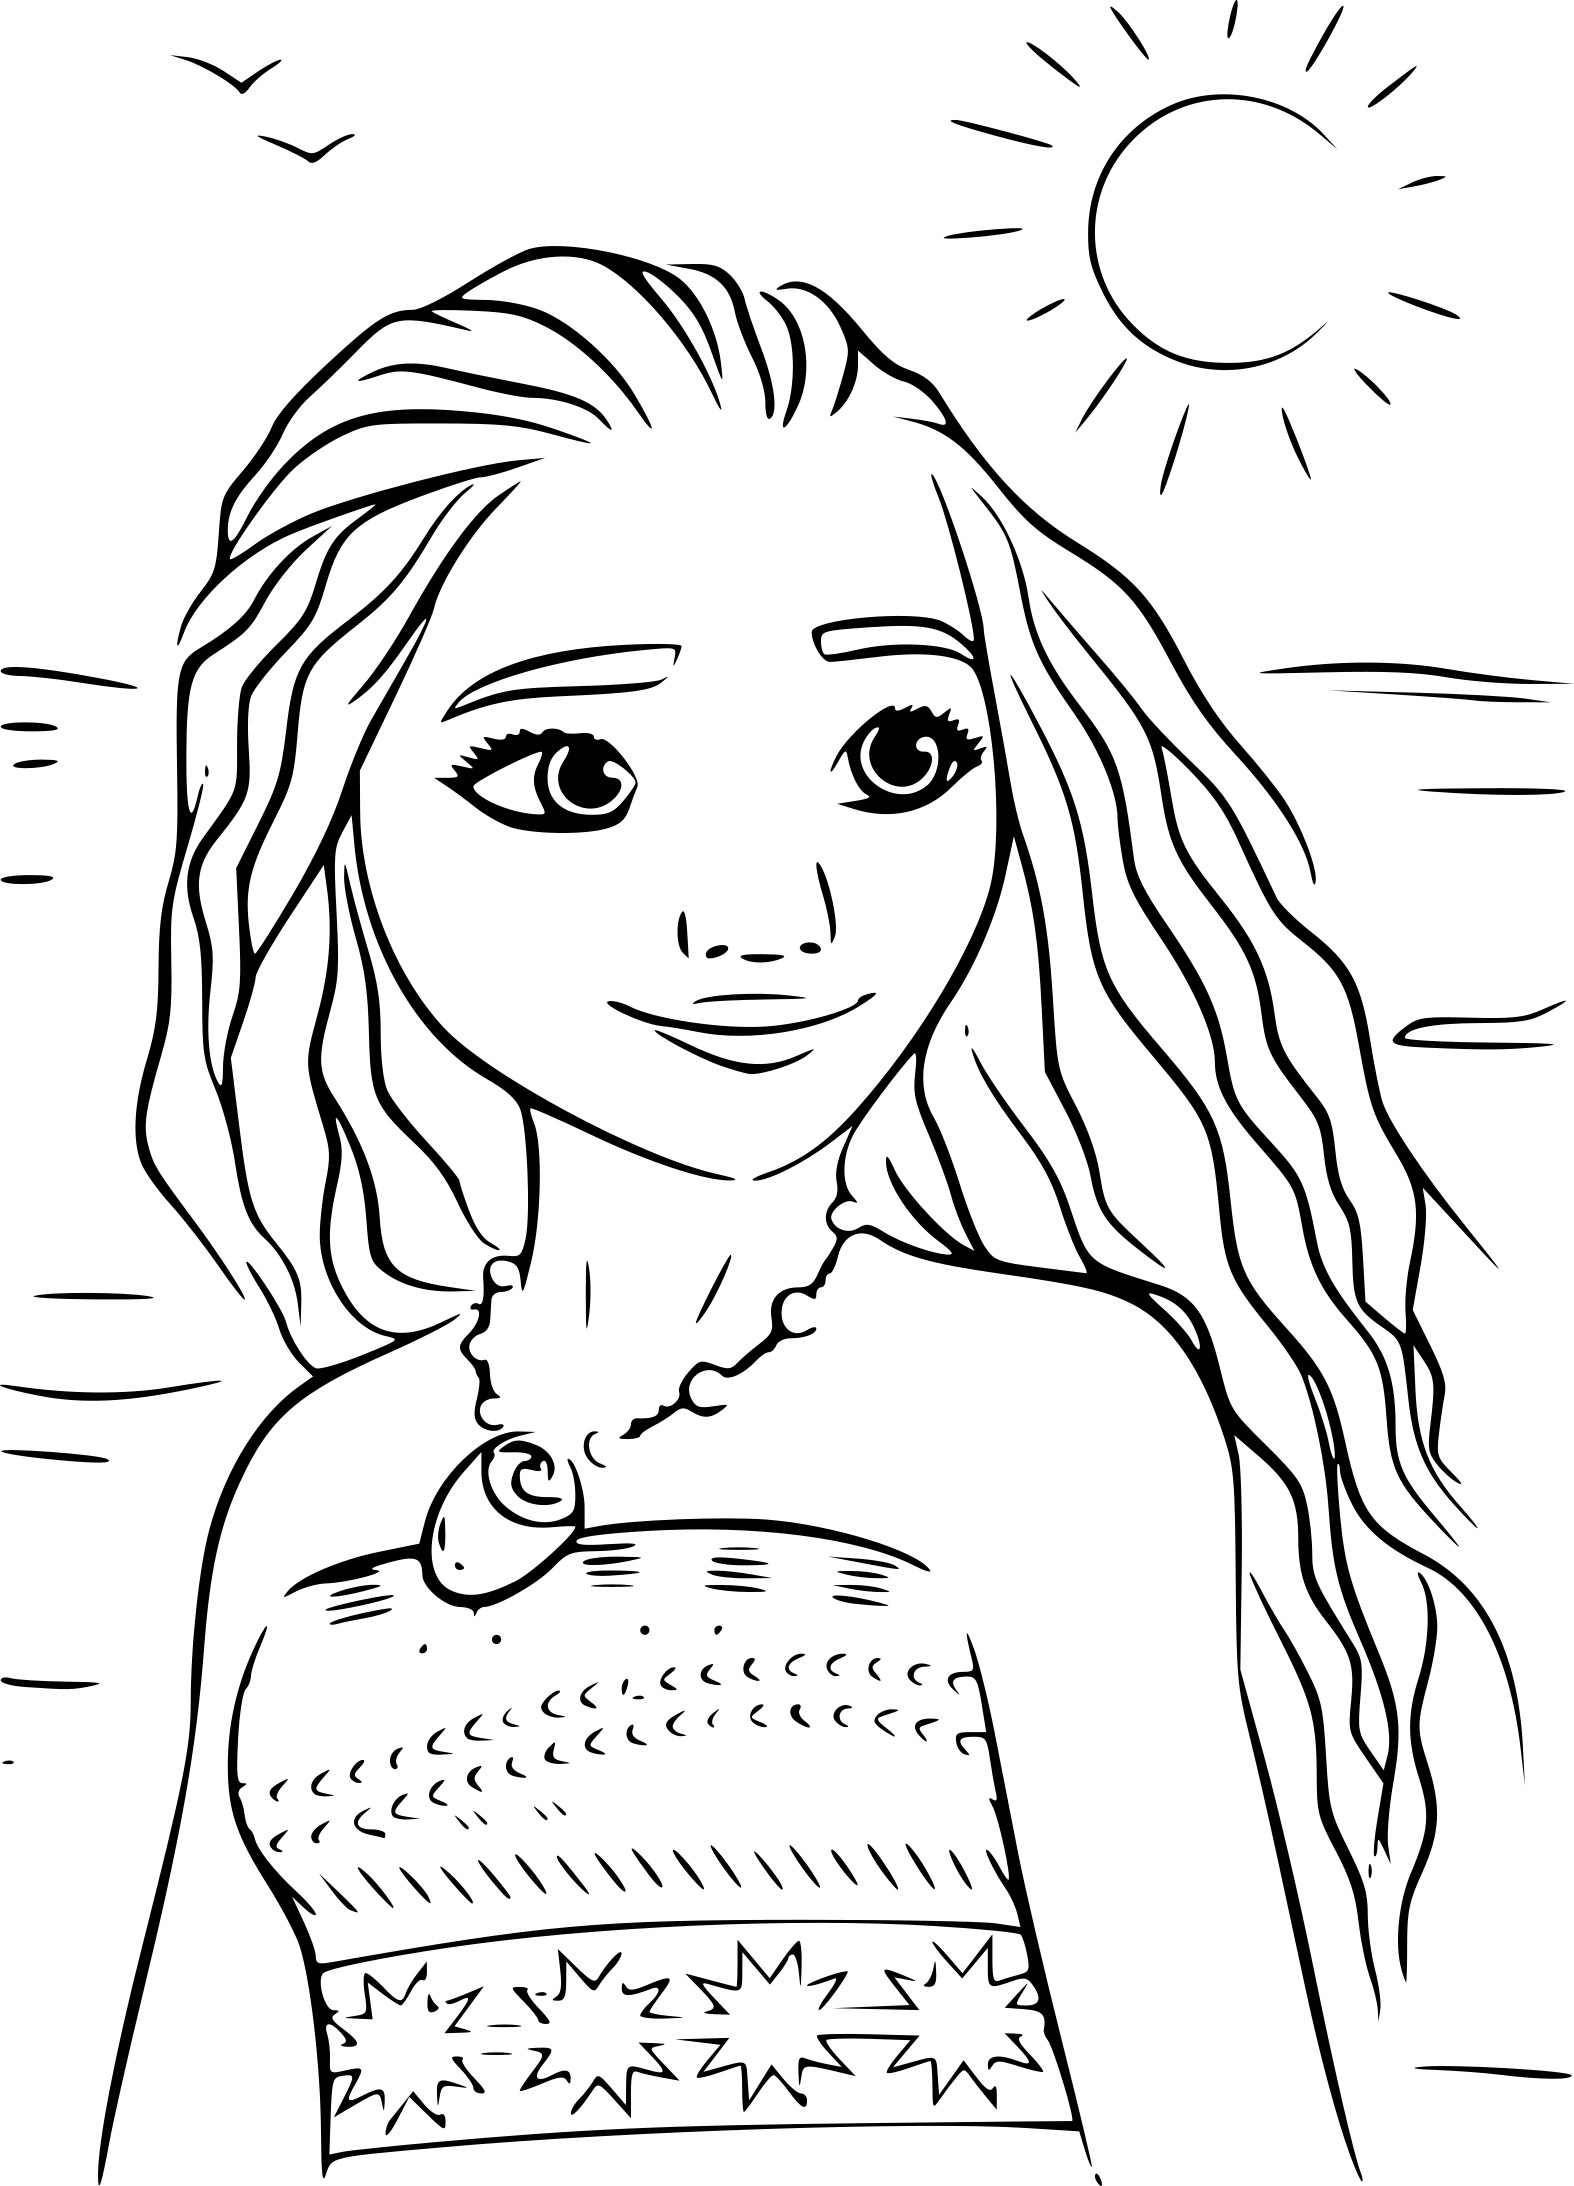 Vaiana The Legend Of The End Of The World coloring page